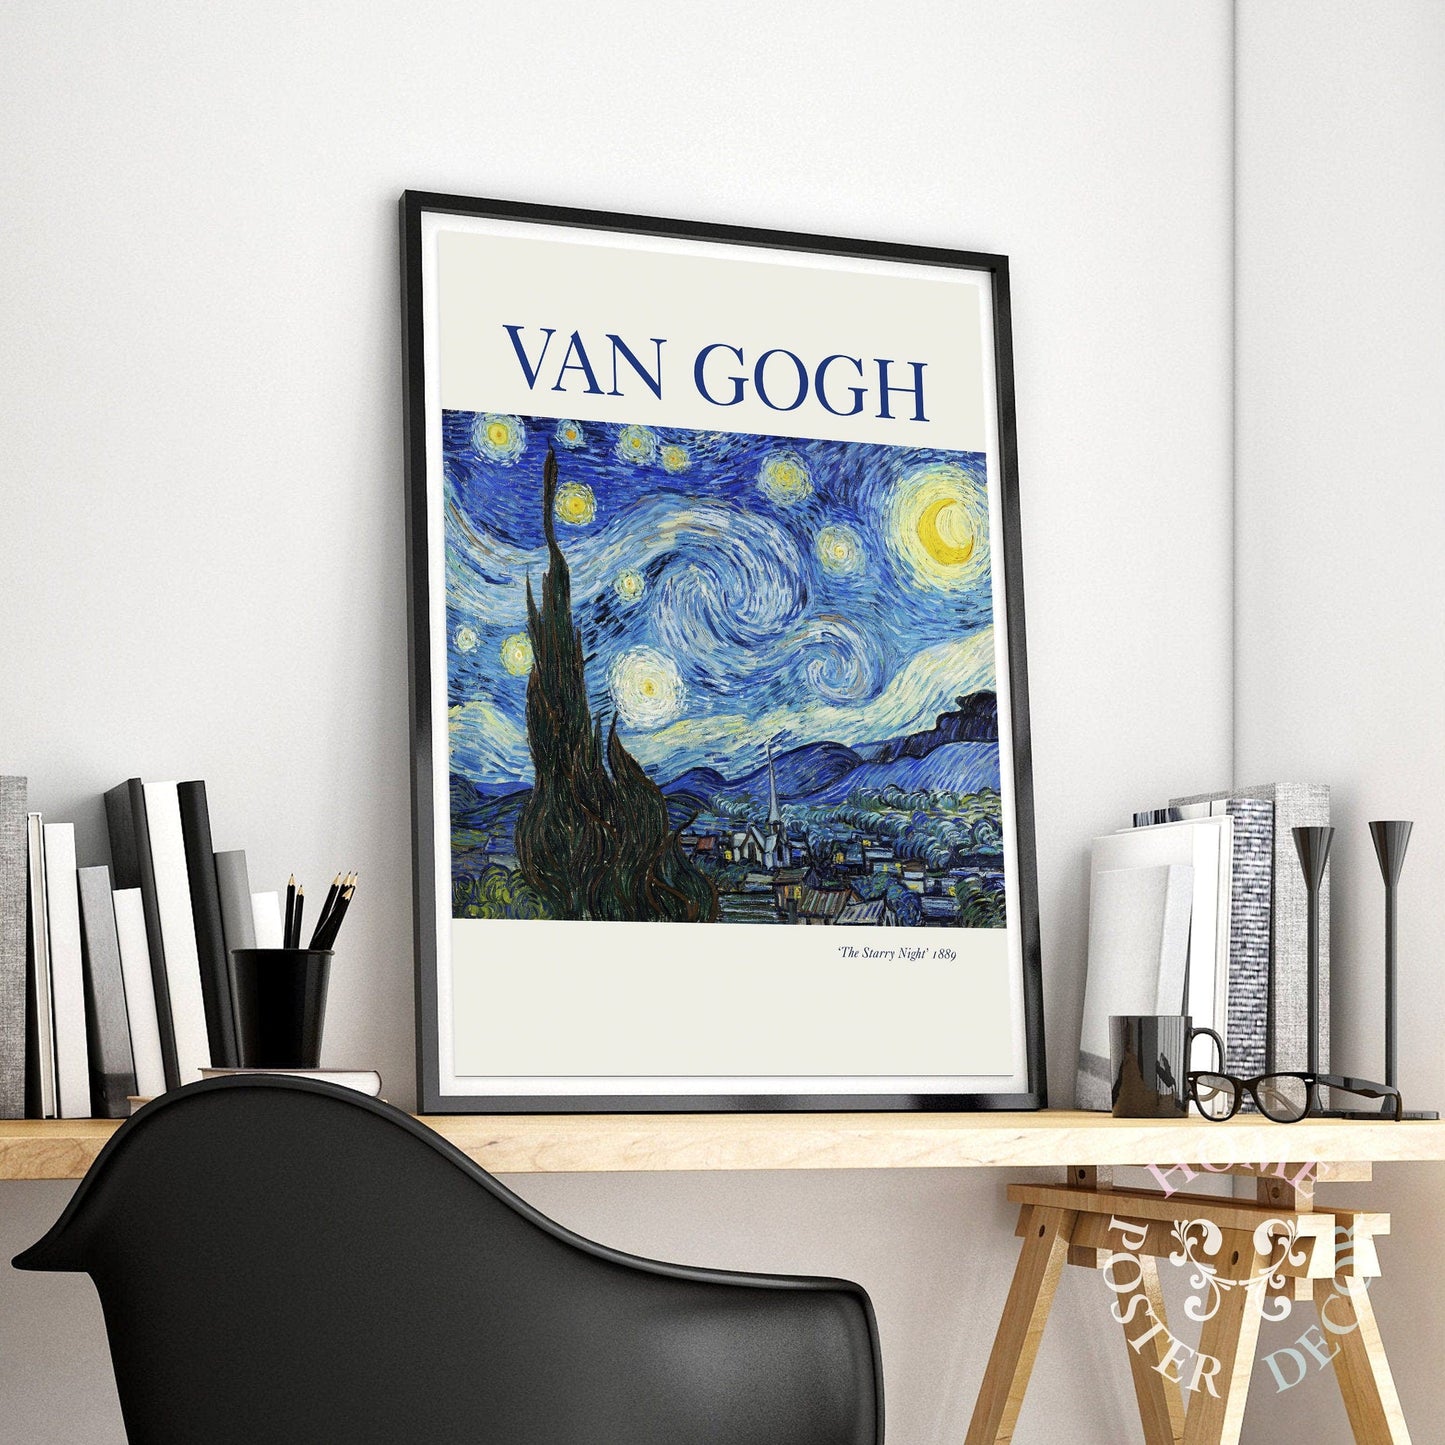 Home Poster Decor Van Gogh Poster, The Starry Night 1889, Van Gogh Painting, Famous Painting, Post-impressionist, Modern Print, Wedding Gift